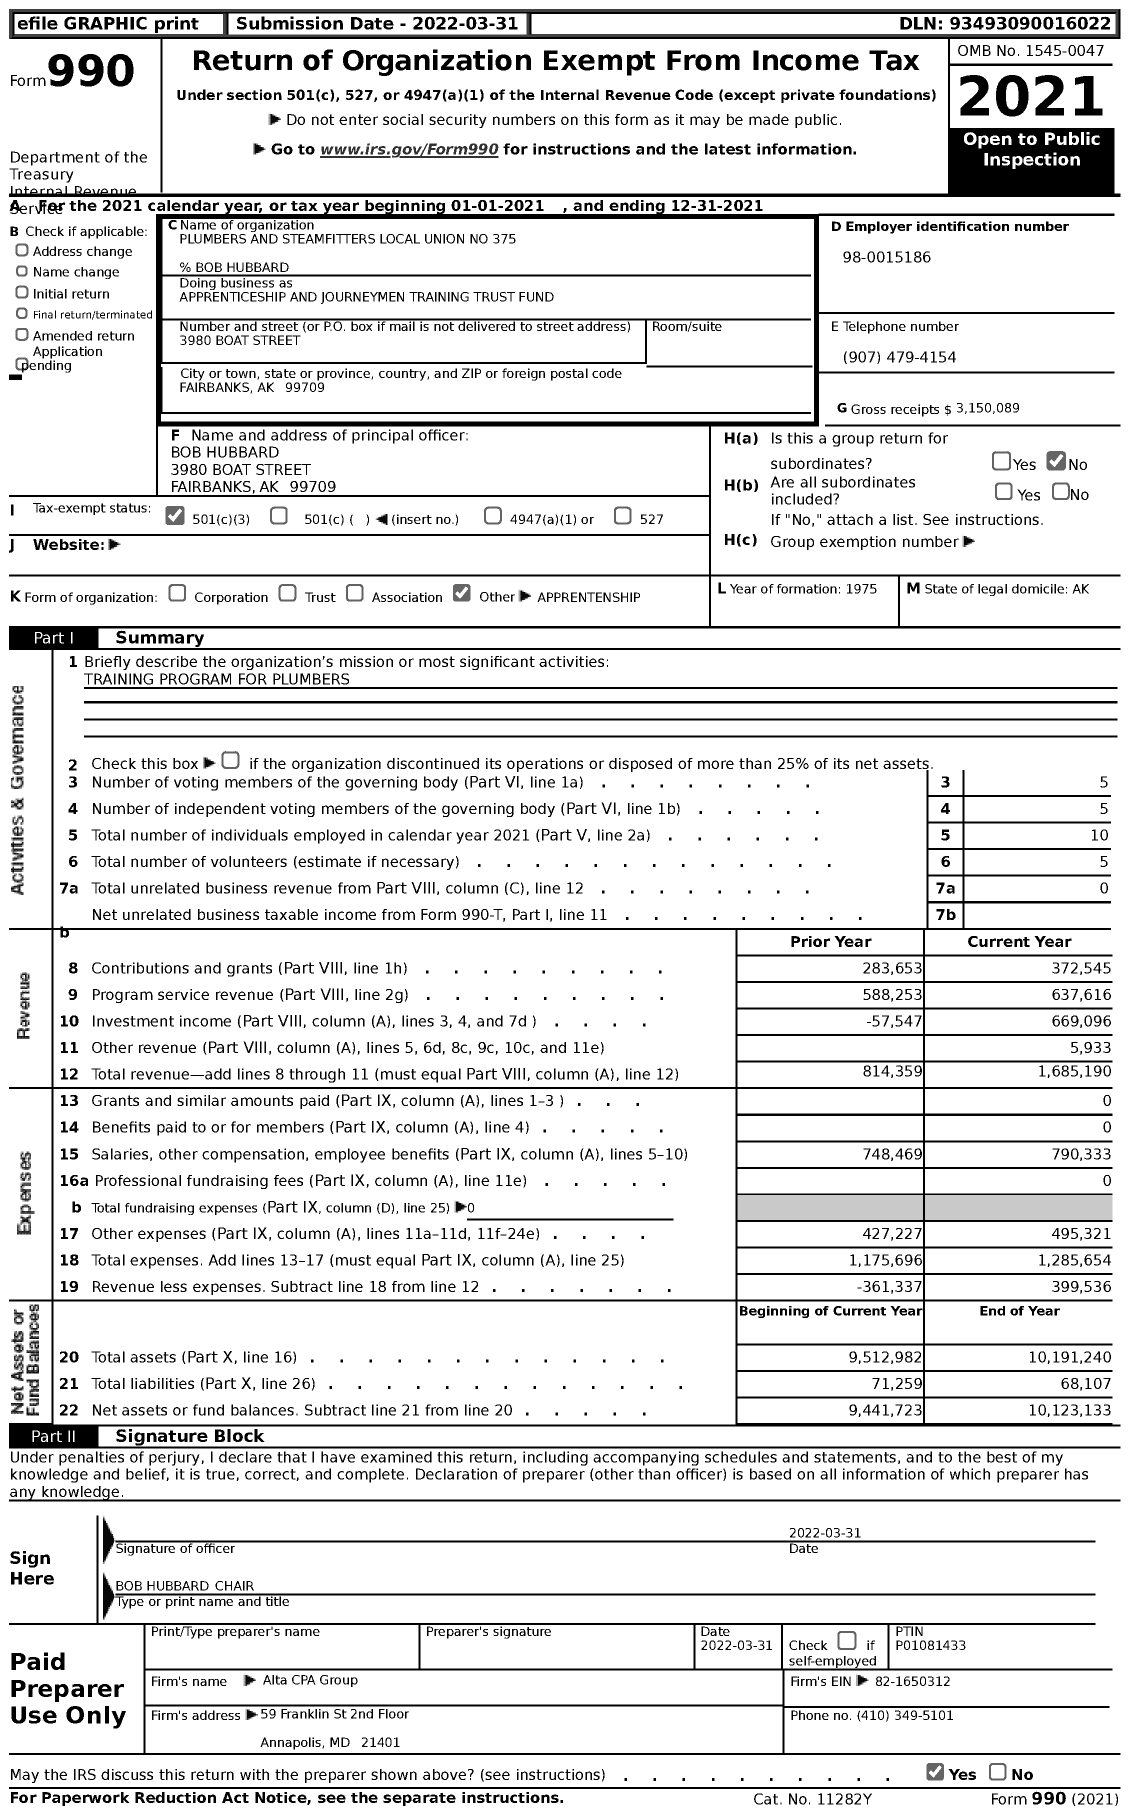 Image of first page of 2021 Form 990 for Apprenticeship and Journeymen Training Trust Fund